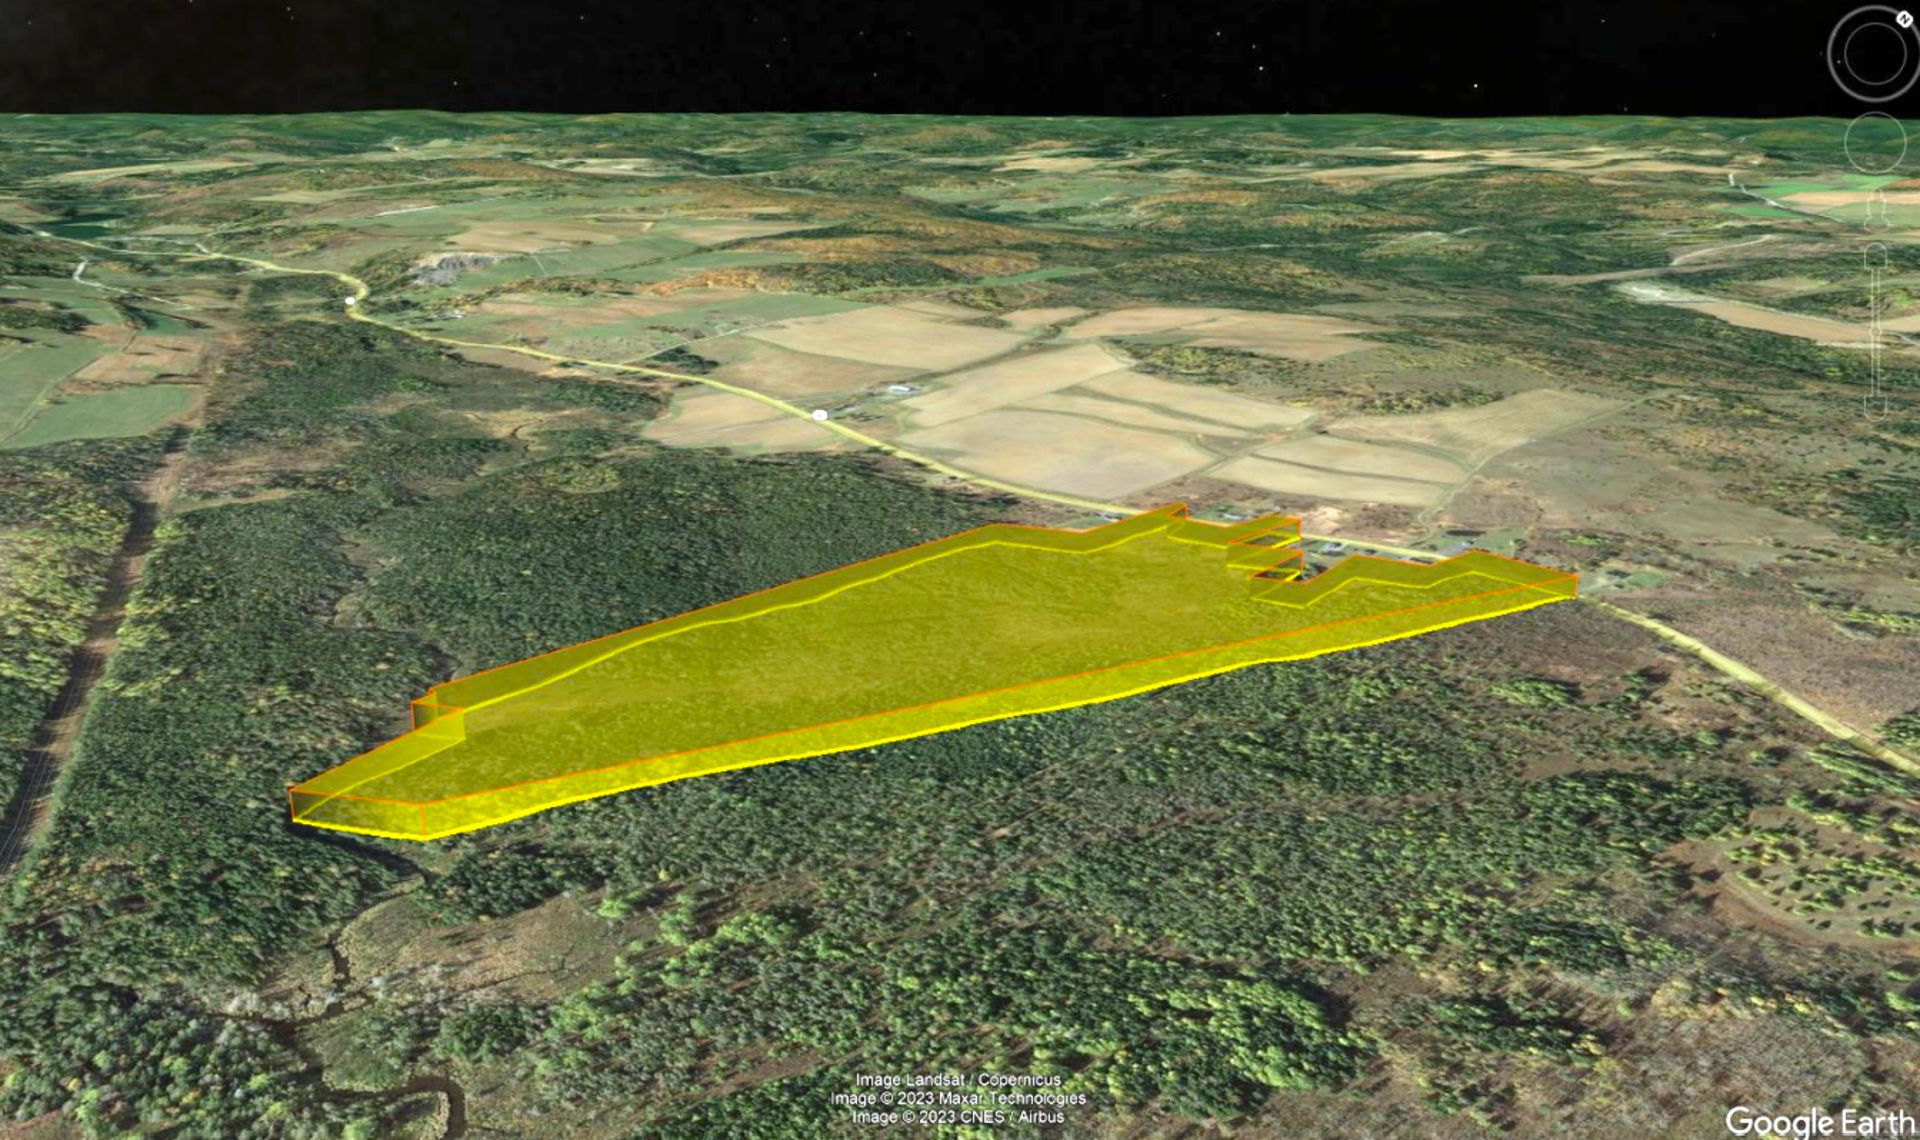 56 Acres on Route 161 in Aroostook County, Maine! - Image 4 of 11